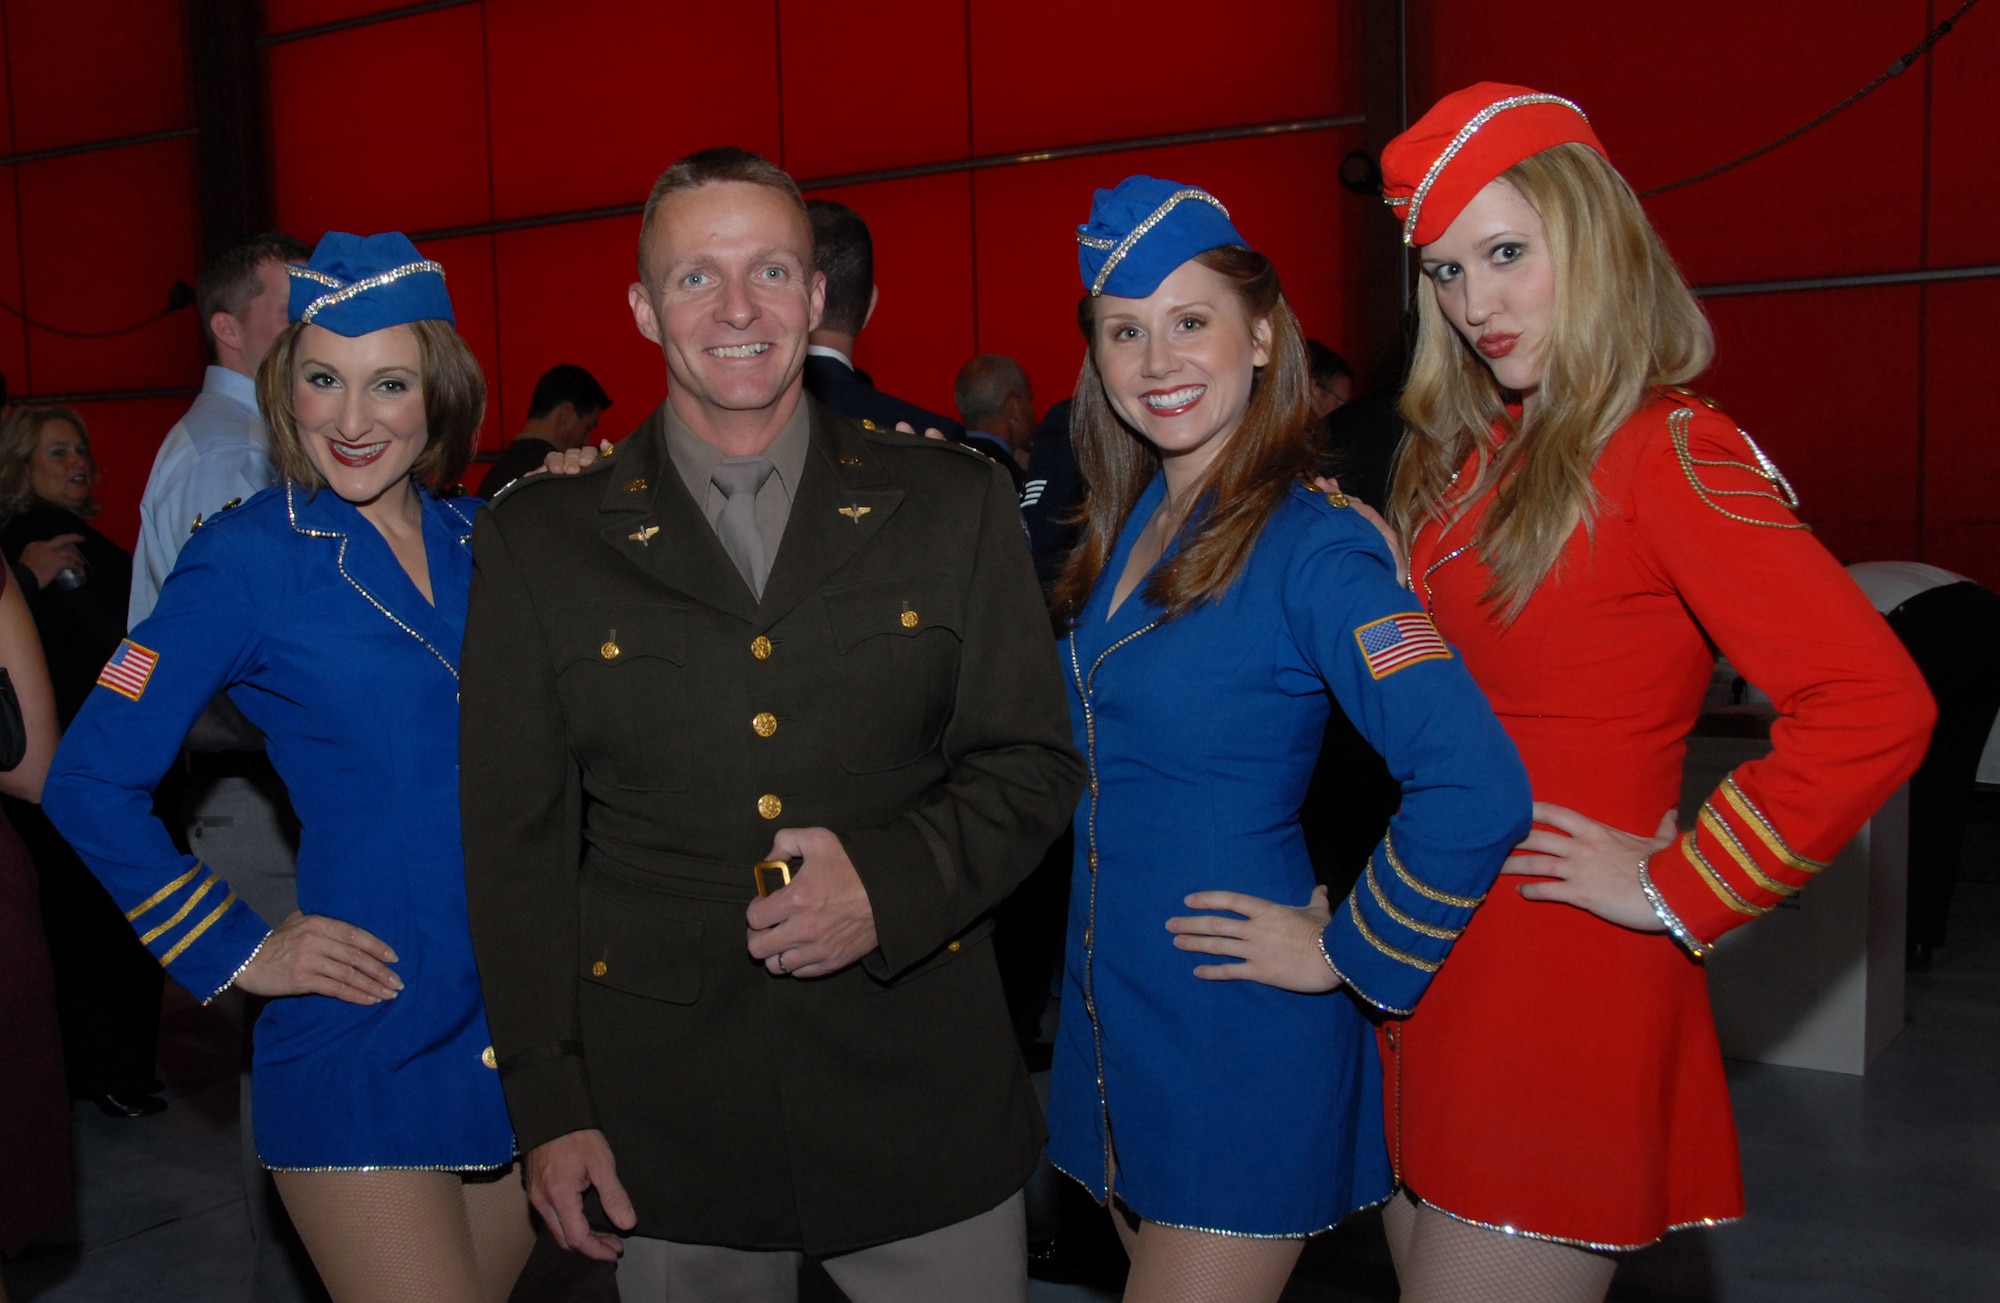 Capt. Ernest Lancto, dressed in an Army Air Corps uniform, poses with the Liberty Belles at the 109th Airlift Wing's 60th Anniversary Hangar Dance on Oct. 4. The Liberty Belles are a USO-style group and performed at the event. (U.S. Air Force photo by Master Sgt. Willie Gizara)